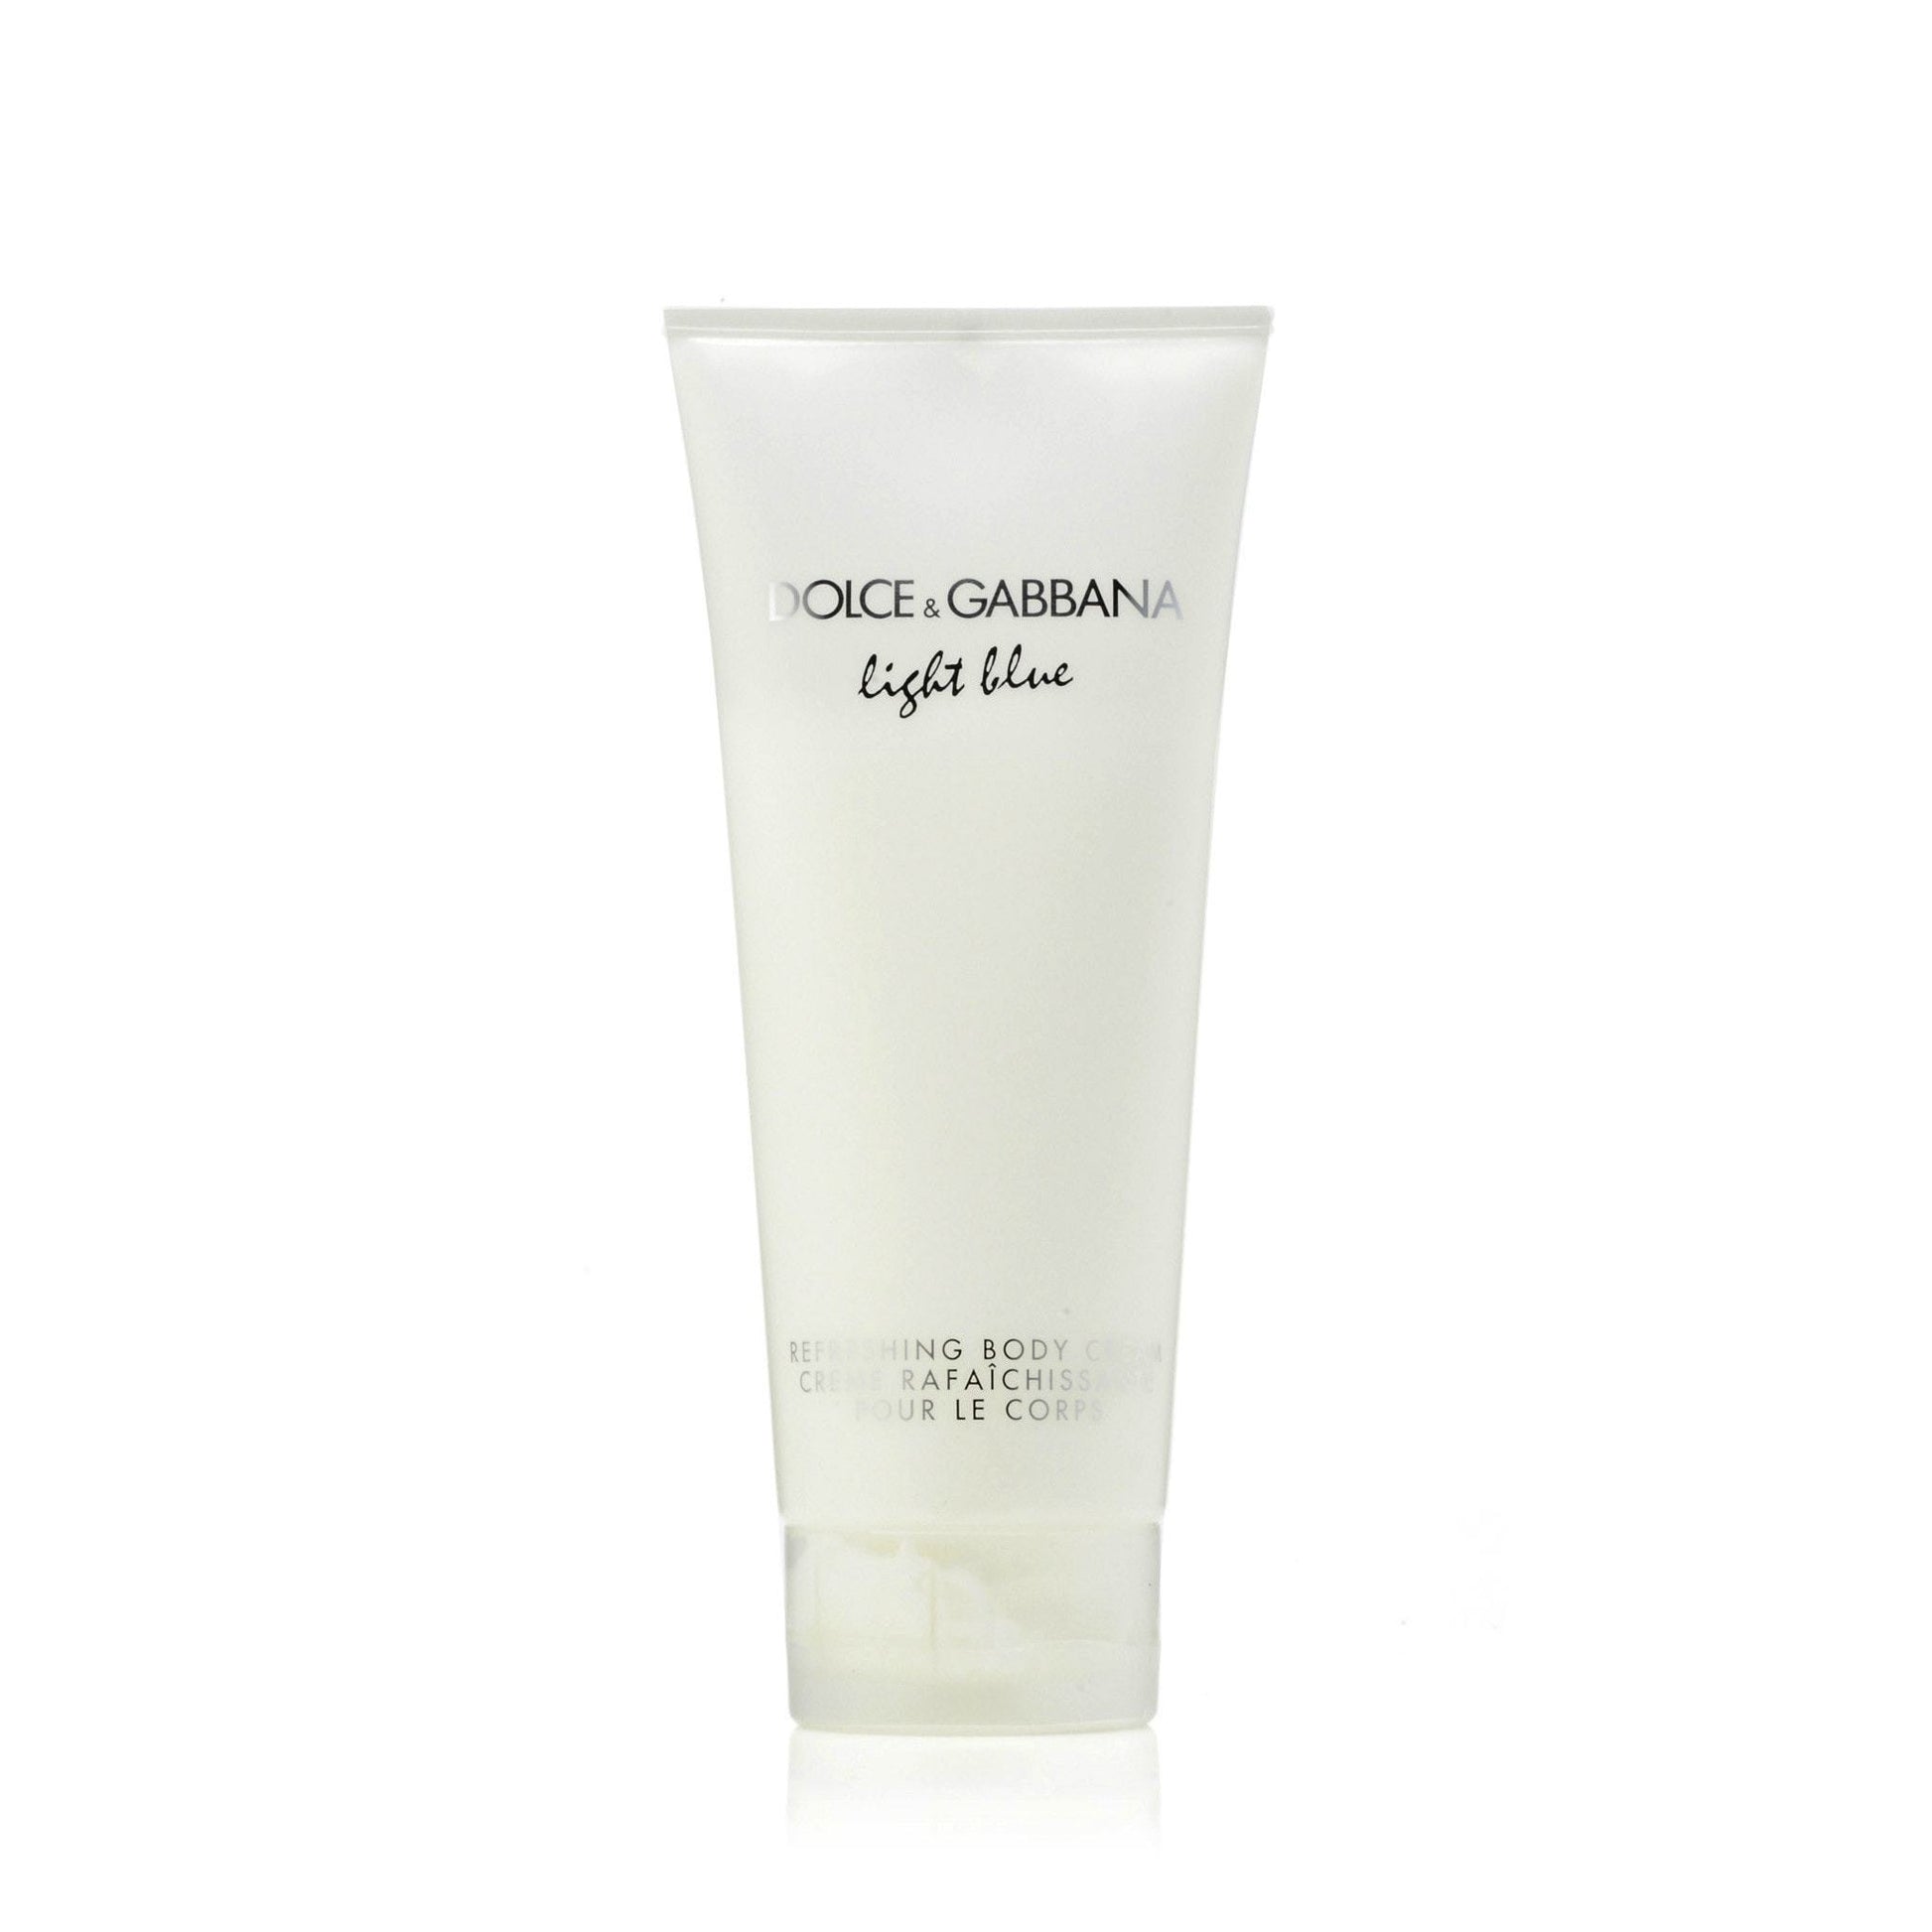 Light Blue Body Cream for Women by D&G, Product image 1